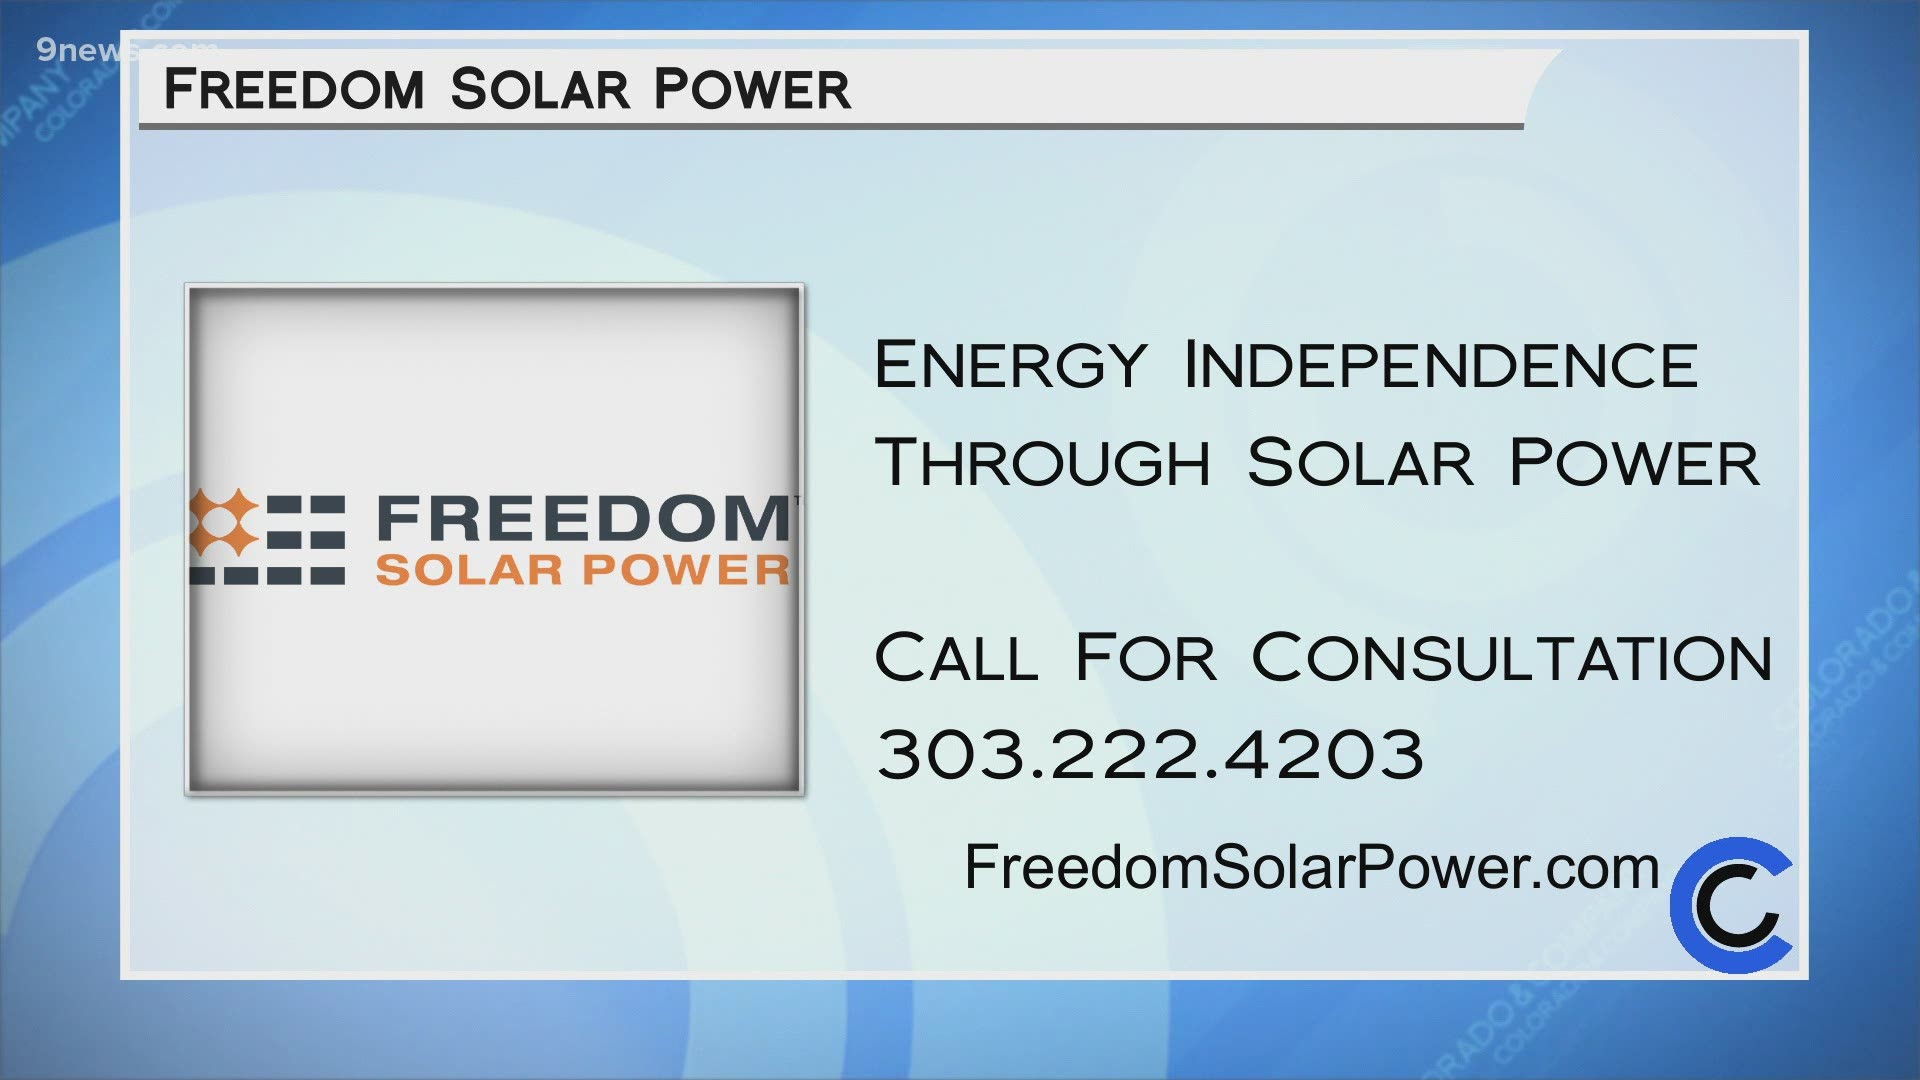 Explore energy independence with Freedom Solar. Call 303.222.4203 or visit FreedomSolar.com to get started.